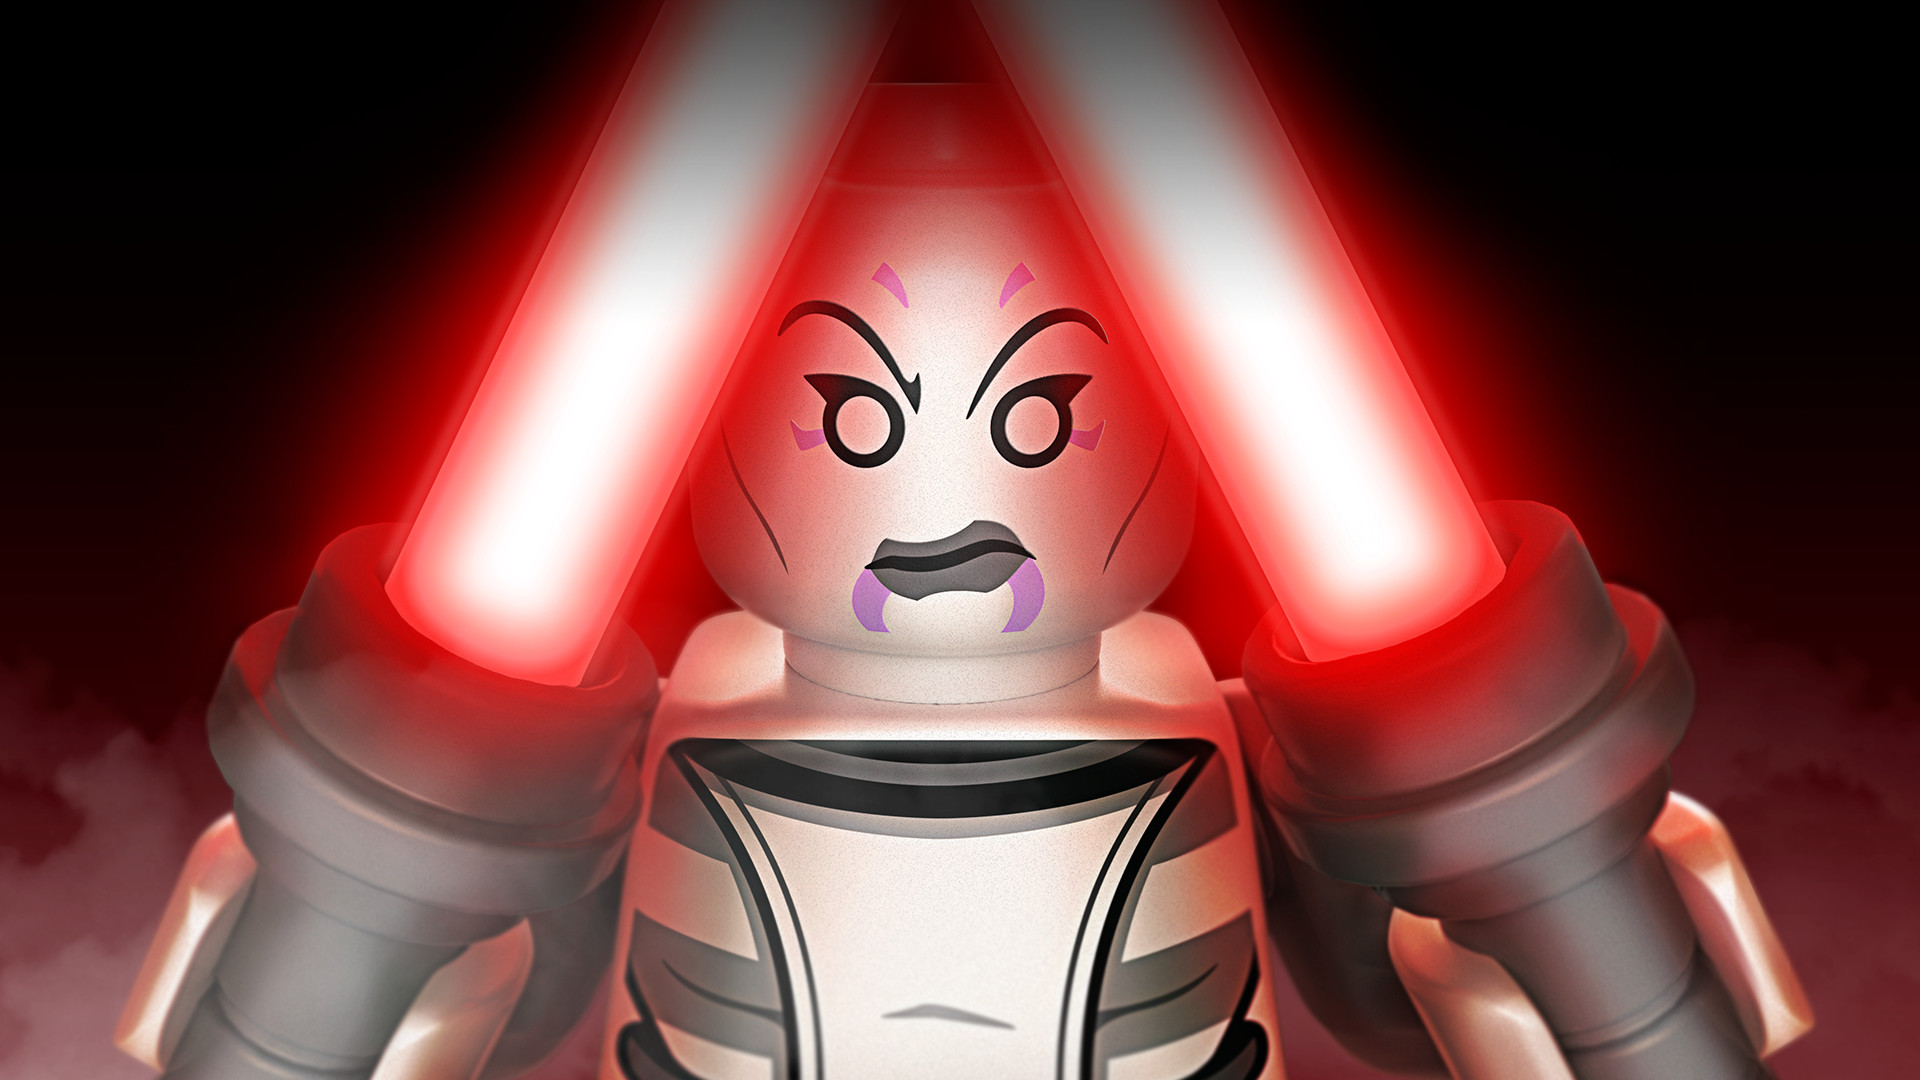 LEGO Star Wars: The Force Awakens - The Clone Wars Character Pack DLC Steam CD Key 1.68 usd